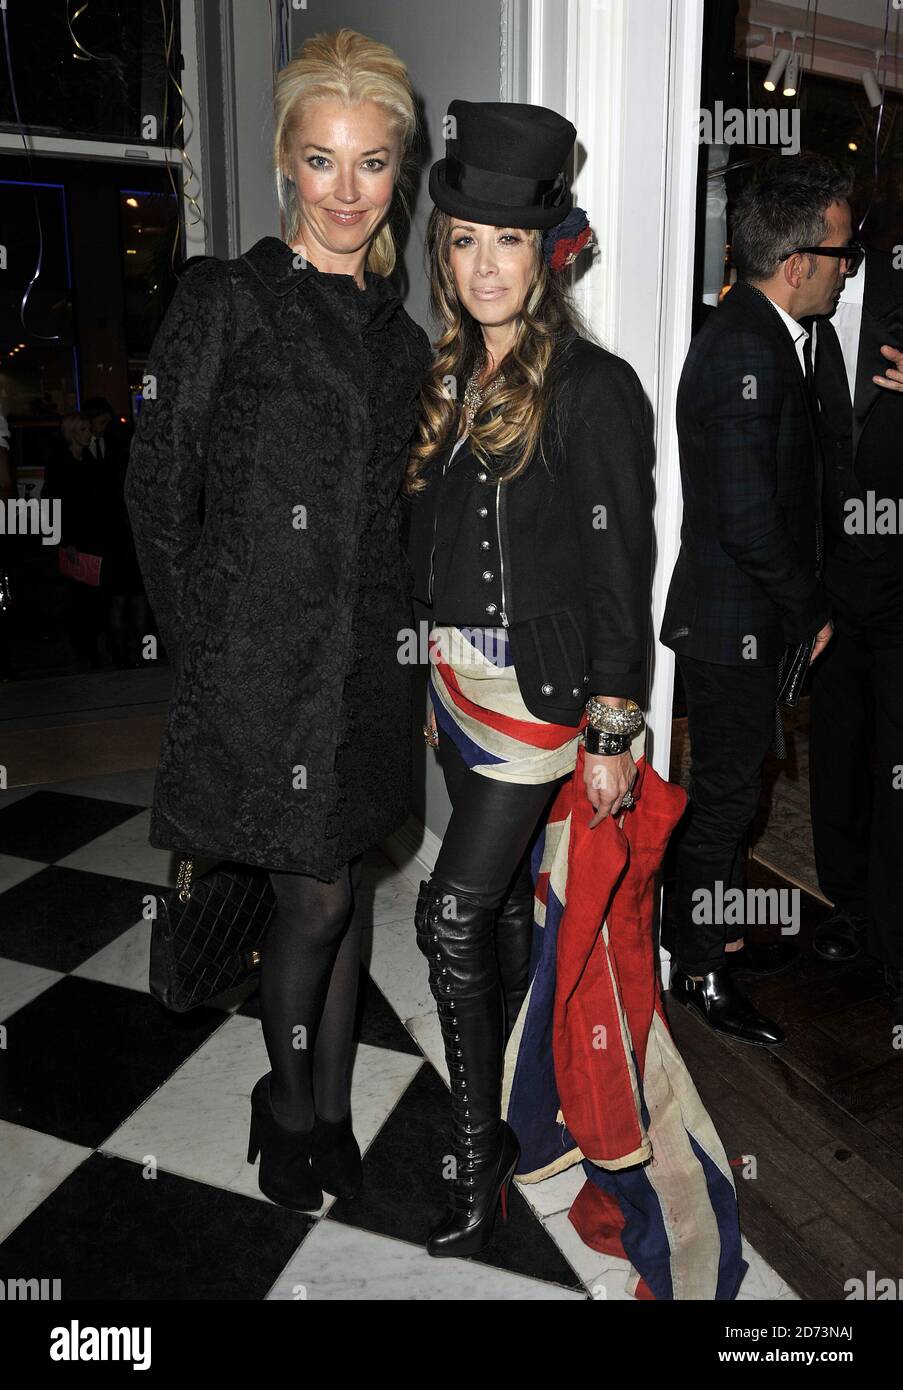 Tamara Beckwith (l) and Gela Nash-Taylor attending the launch party for Juicy Couture's flagship store in central London. Stock Photo